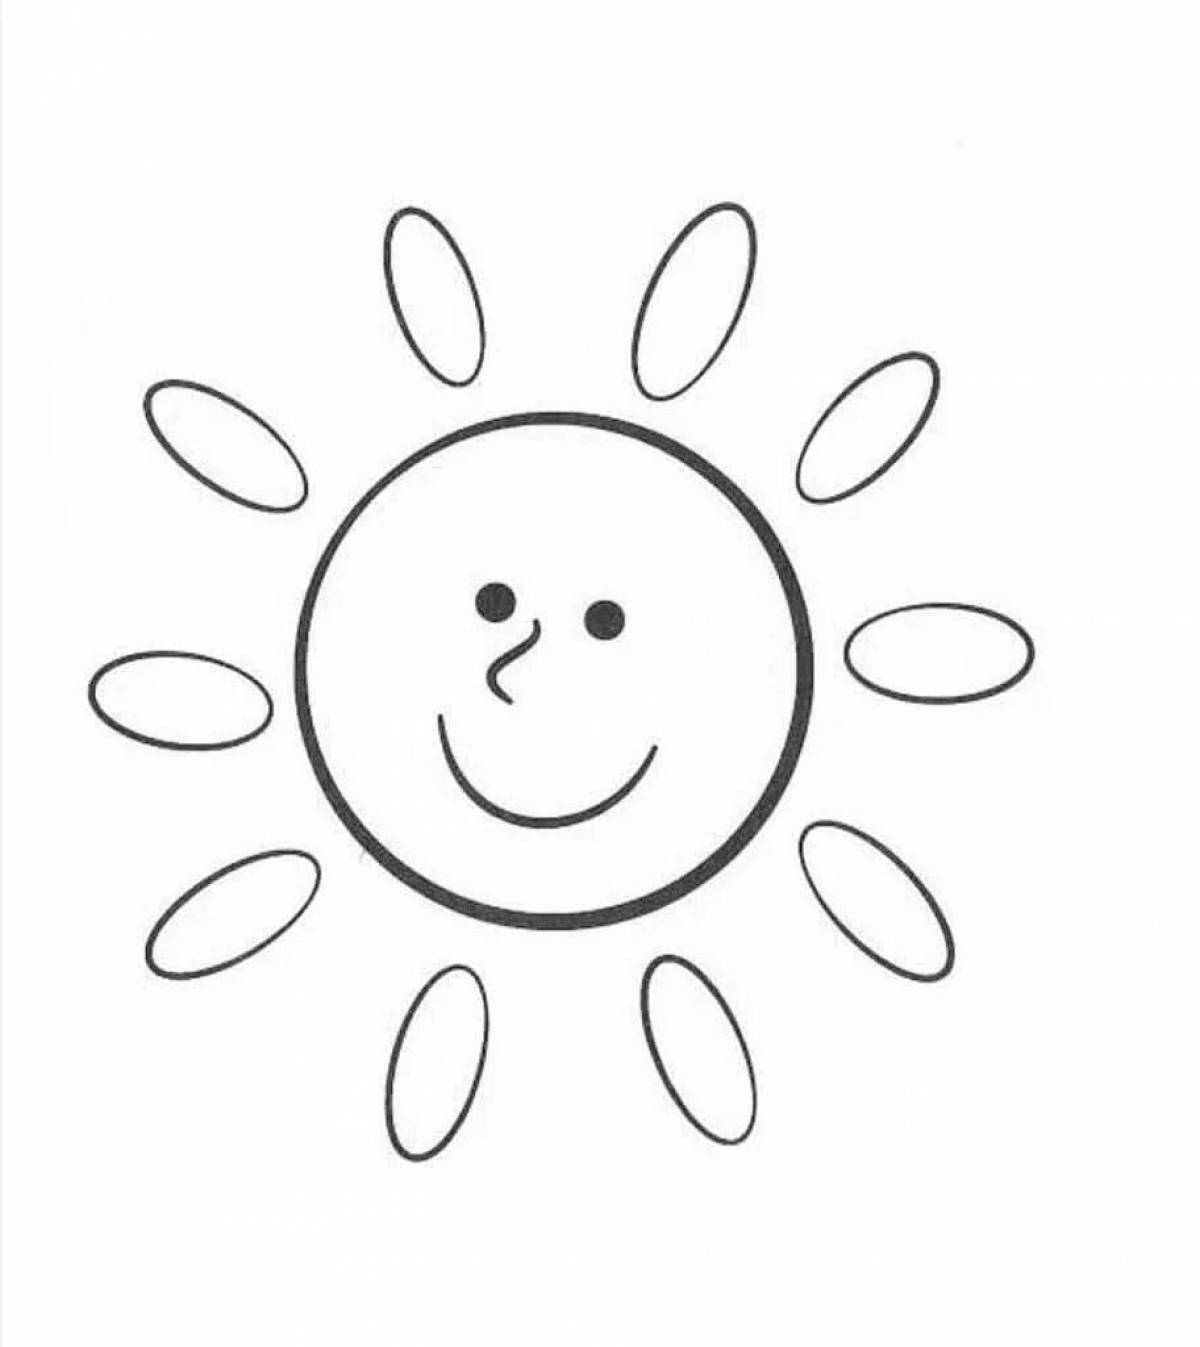 Luminous sun coloring book for children 2-3 years old